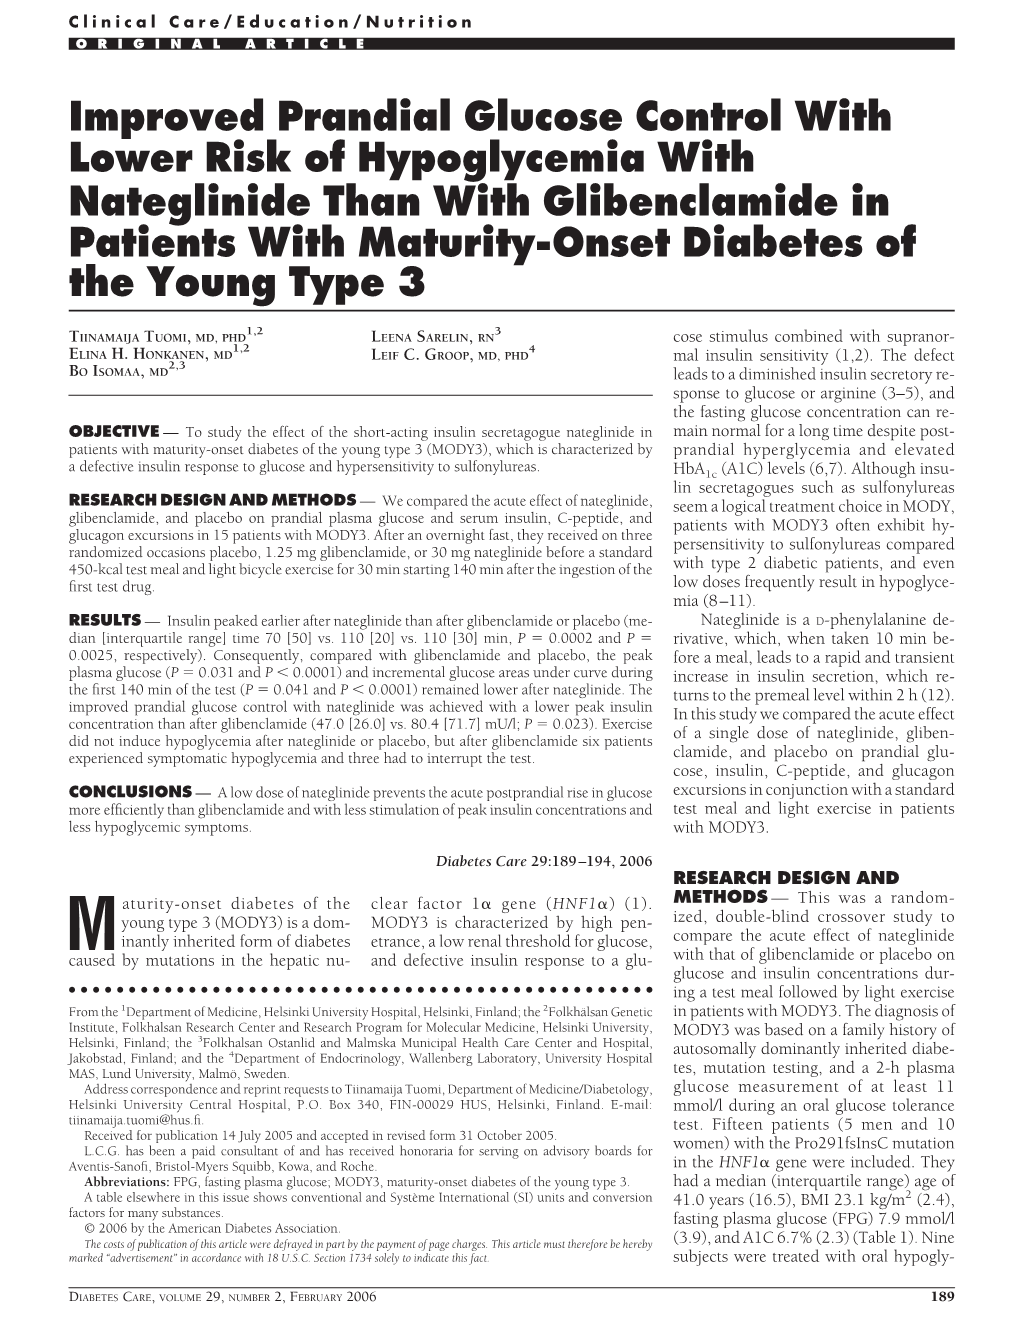 Improved Prandial Glucose Control with Lower Risk of Hypoglycemia with Nateglinide Than with Glibenclamide in Patients with Matu